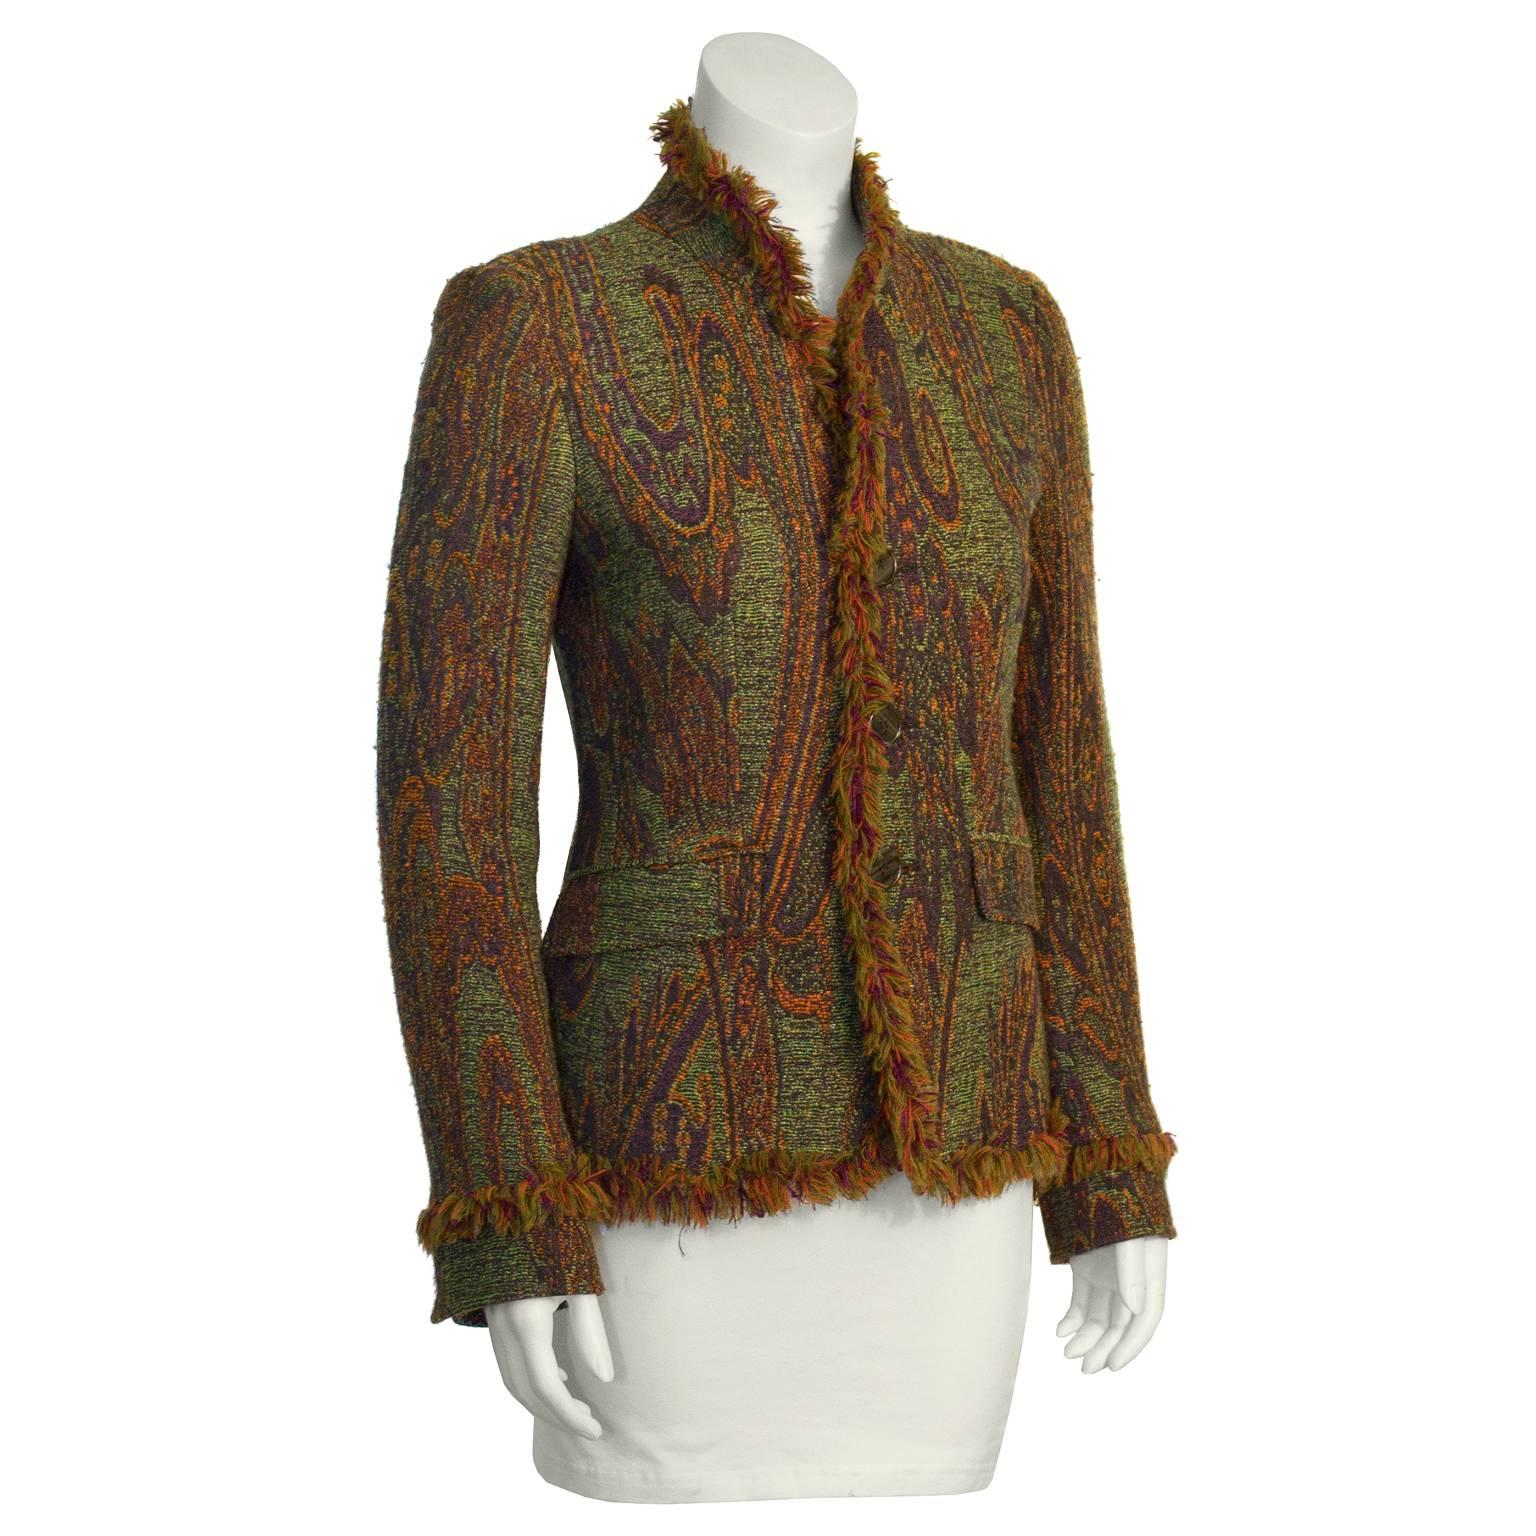 Revive your closet with this funky Etro paisley blazer with a fringe trim from the 2000's. Features front button closure, fitted through waist and two flap pockets at hip. Paisley print has notes of green, purple, yellow and orange. Lined in orange